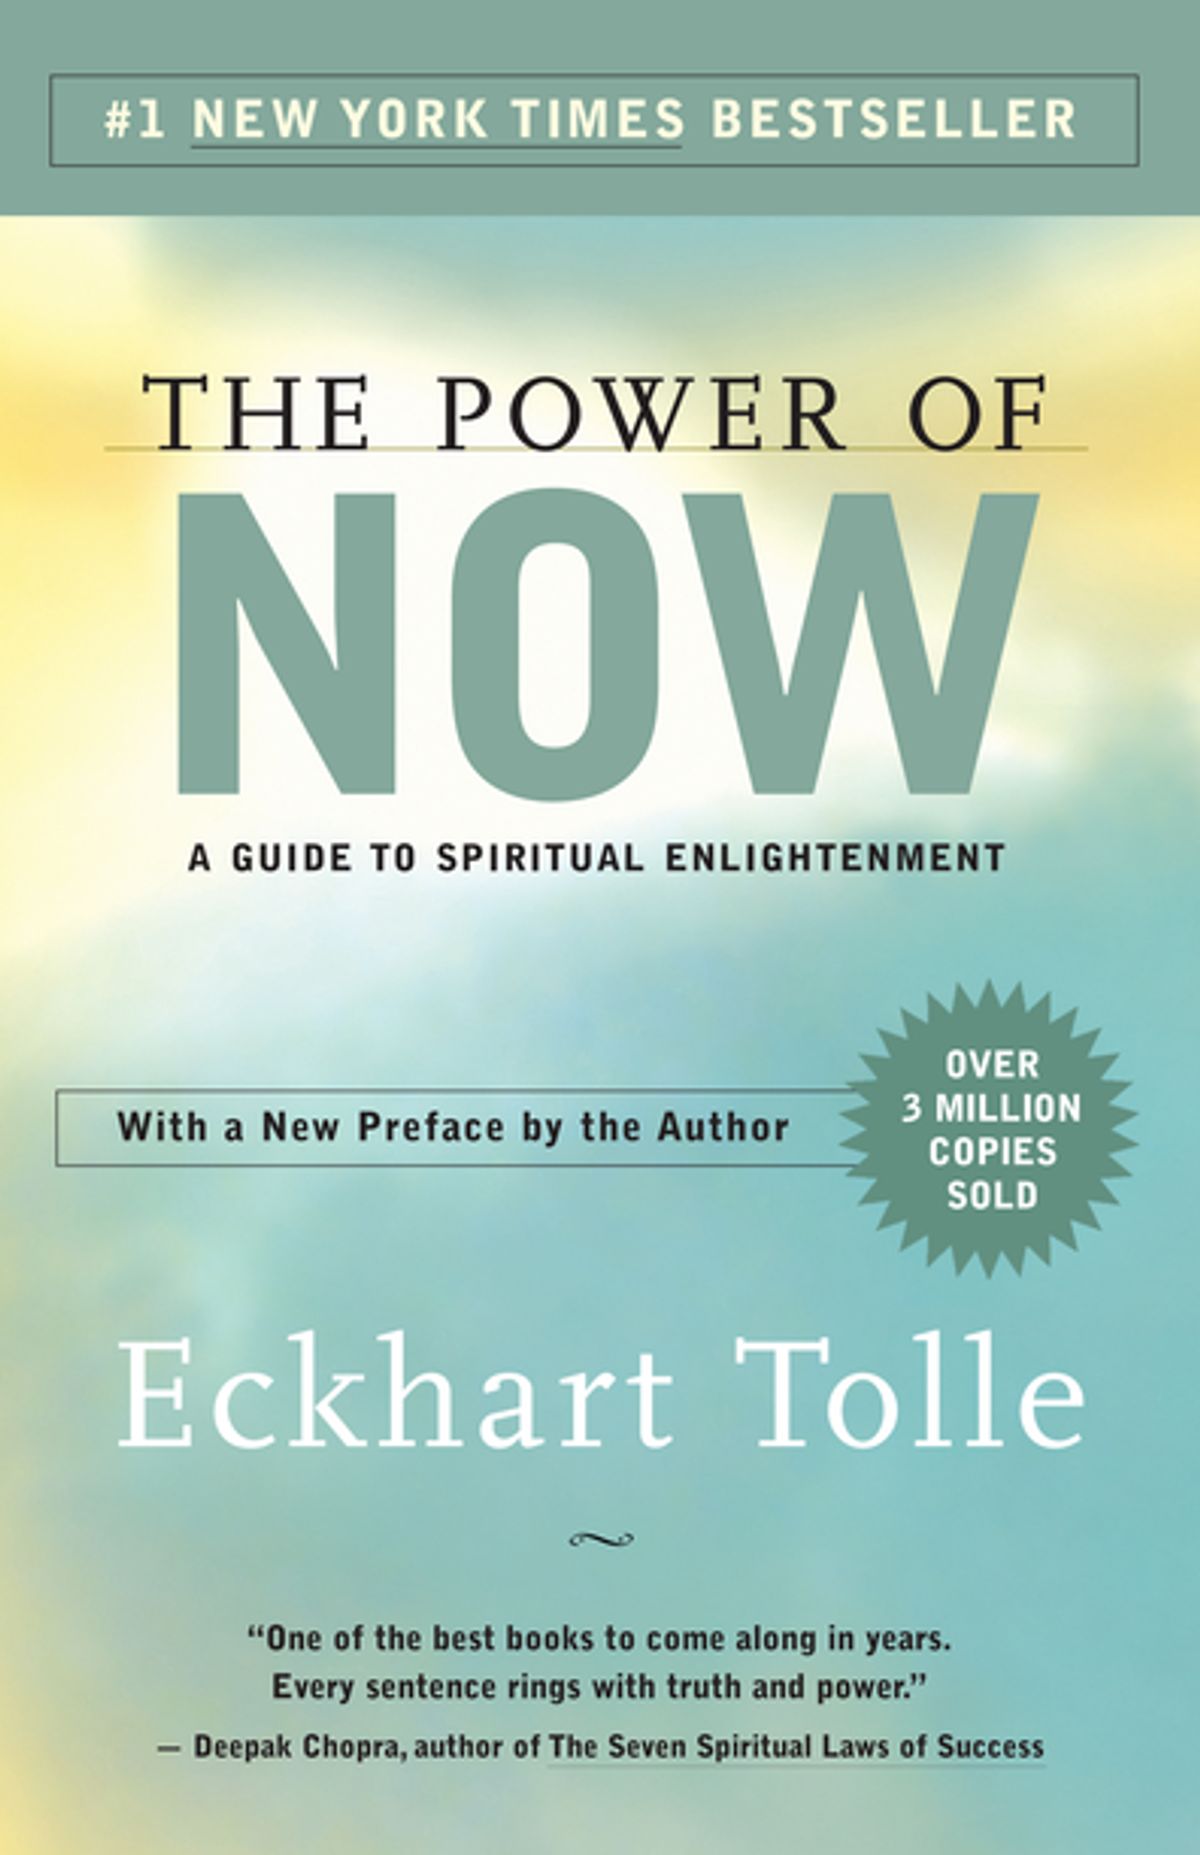 5. 'The Power of Now' by Eckhart Tolle